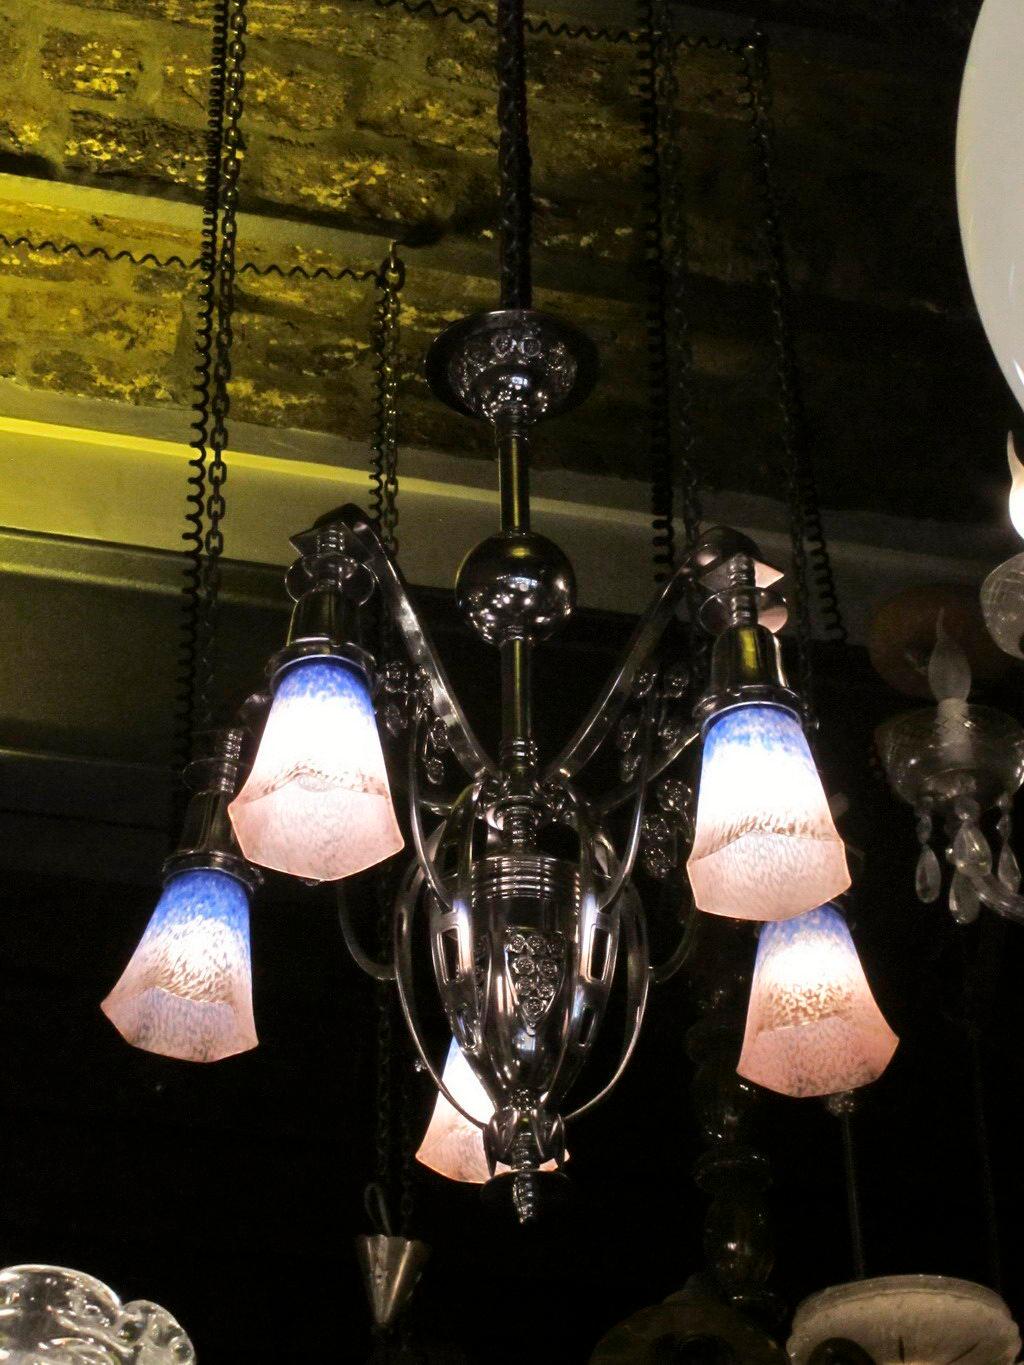 Hanging lamp Schneider.

Material: art glass and silver plated bronze.
Style: Art Nouveau
Country: French
To take care of your property and the lives of our customers, the new wiring has been done.
If you are looking for sconces to match your